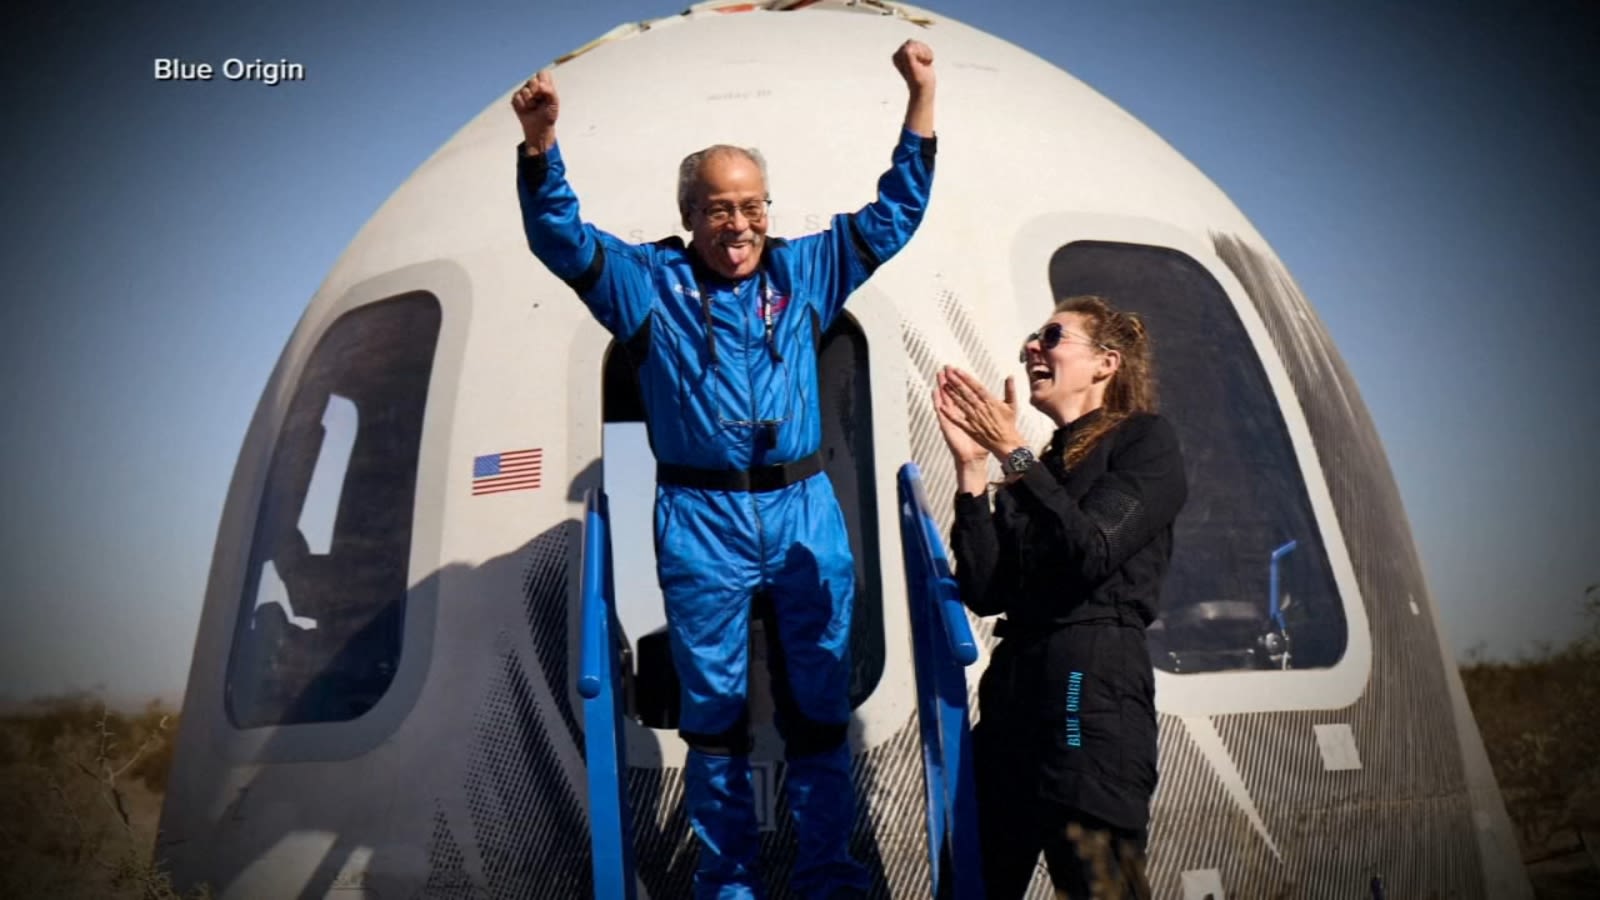 Ed Dwight, America's first Black astronaut candidate, finally goes to space 60 years later